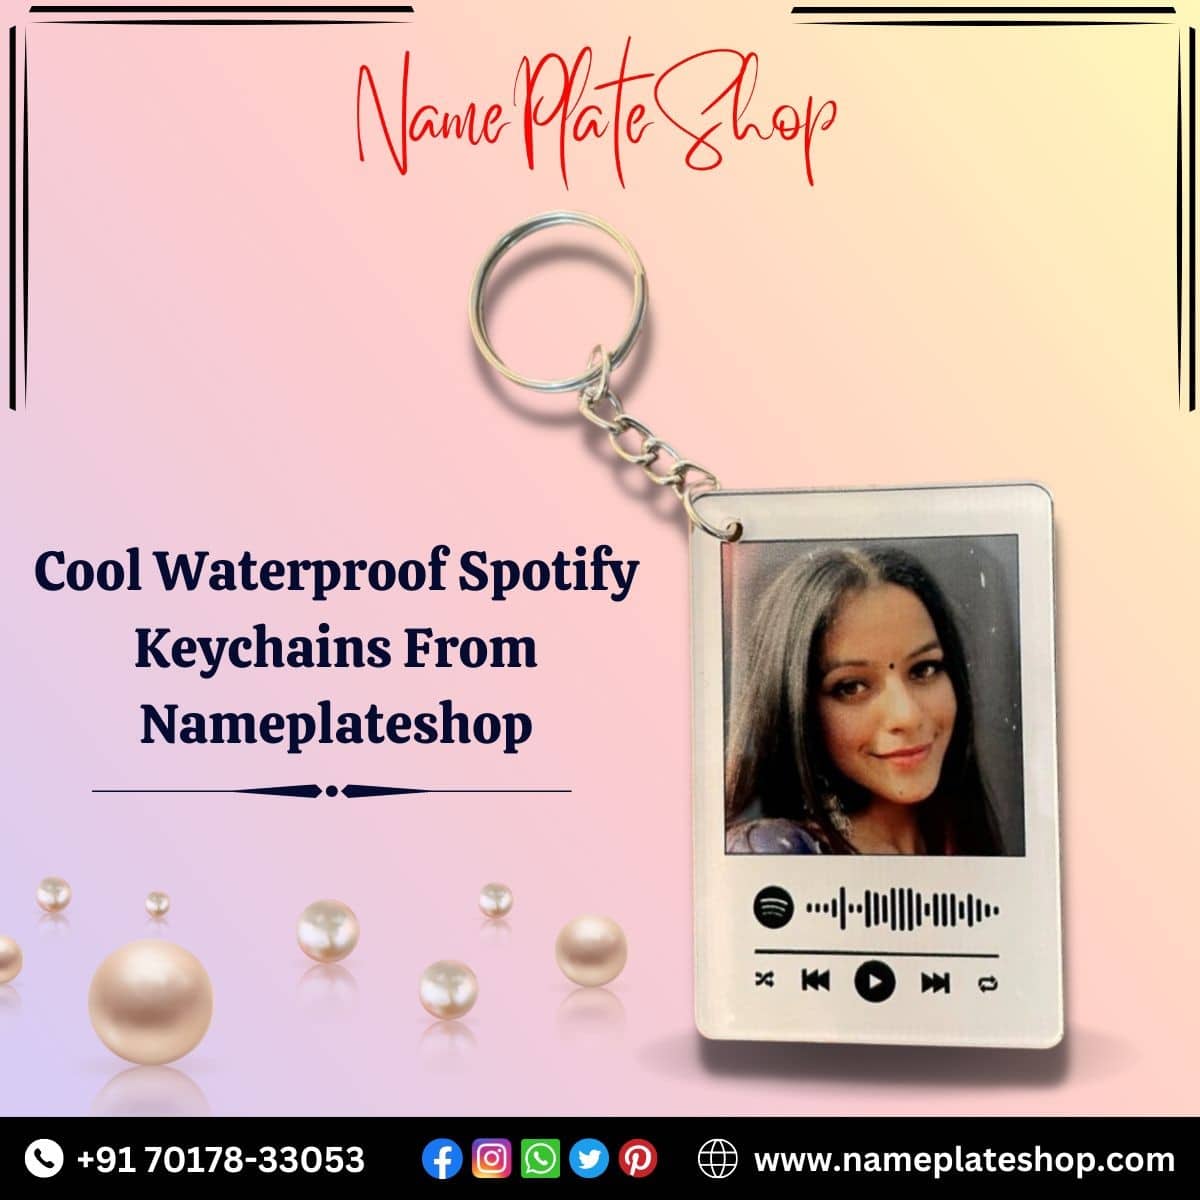 Shop For Waterproof Spotify Keychain From NamePlateShop